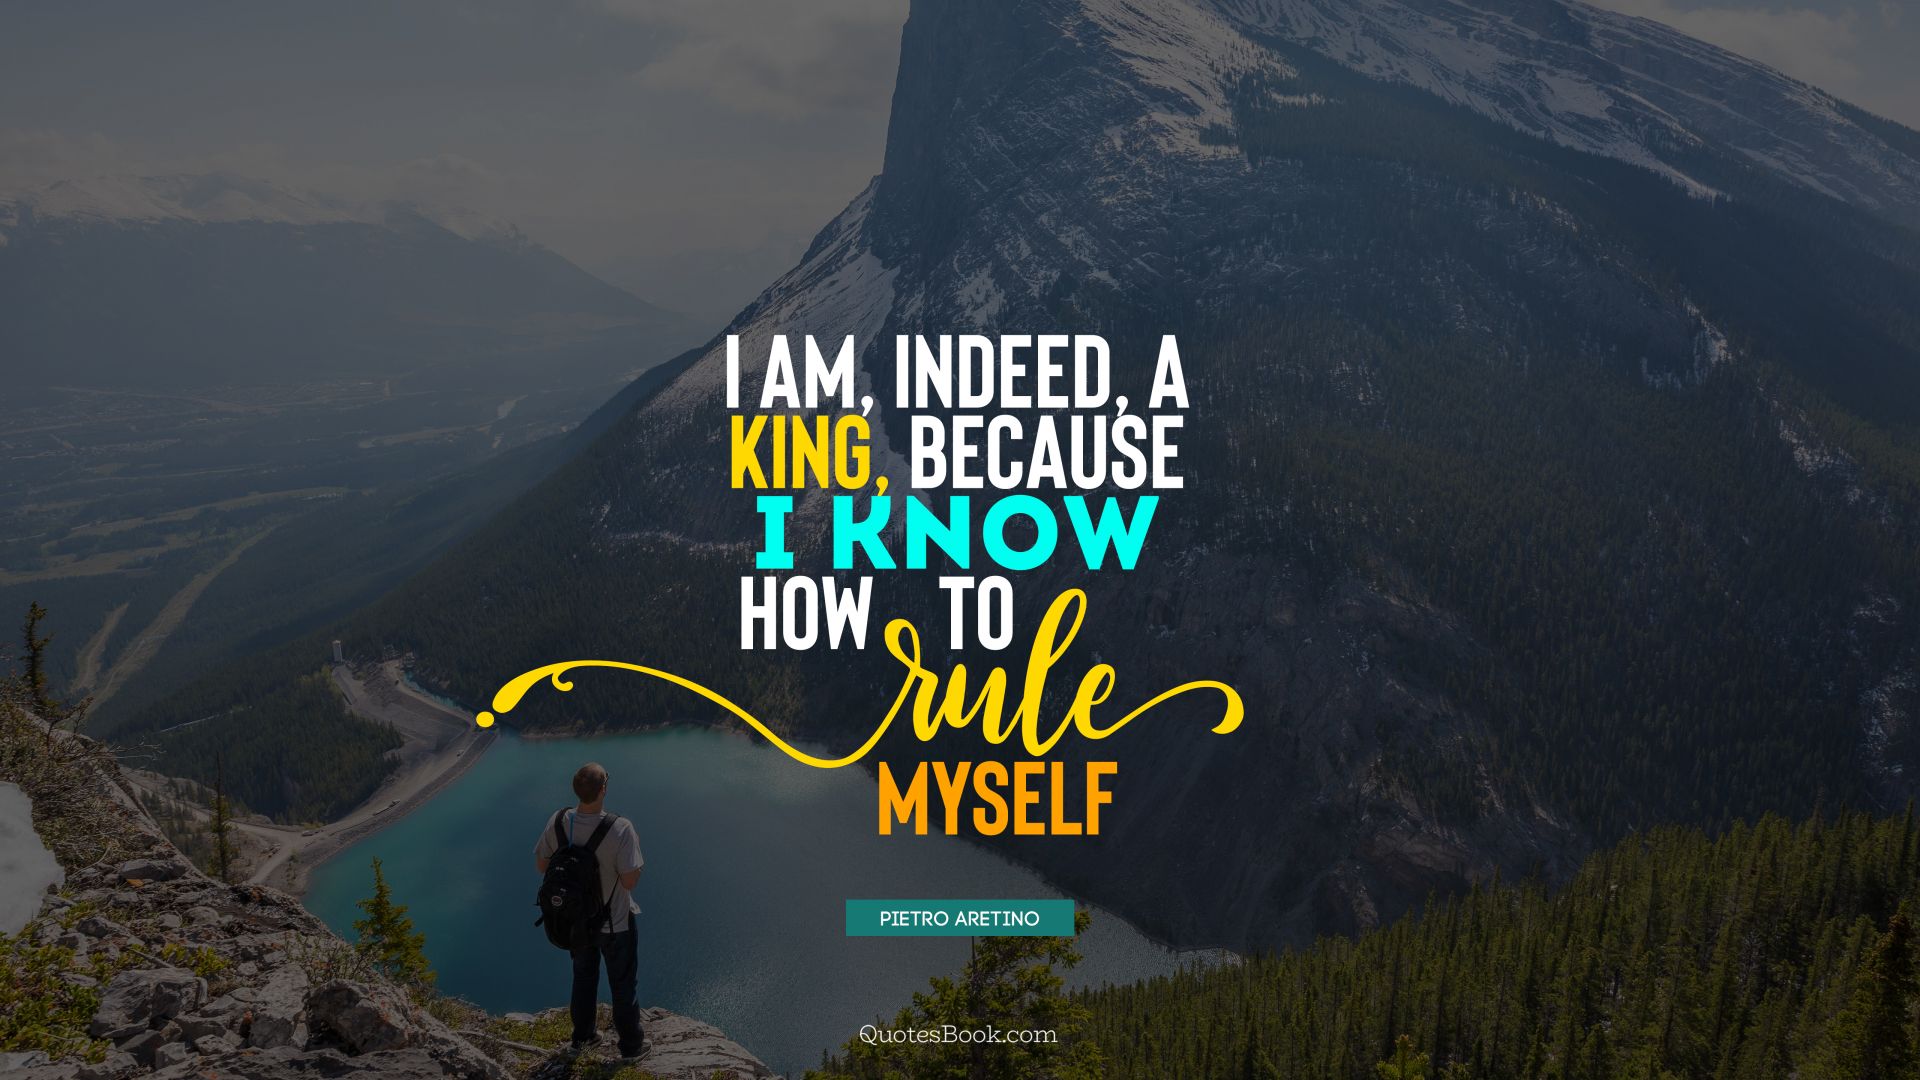 I am, indeed, a king, because I know how to rule myself. - Quote by Pietro Aretino